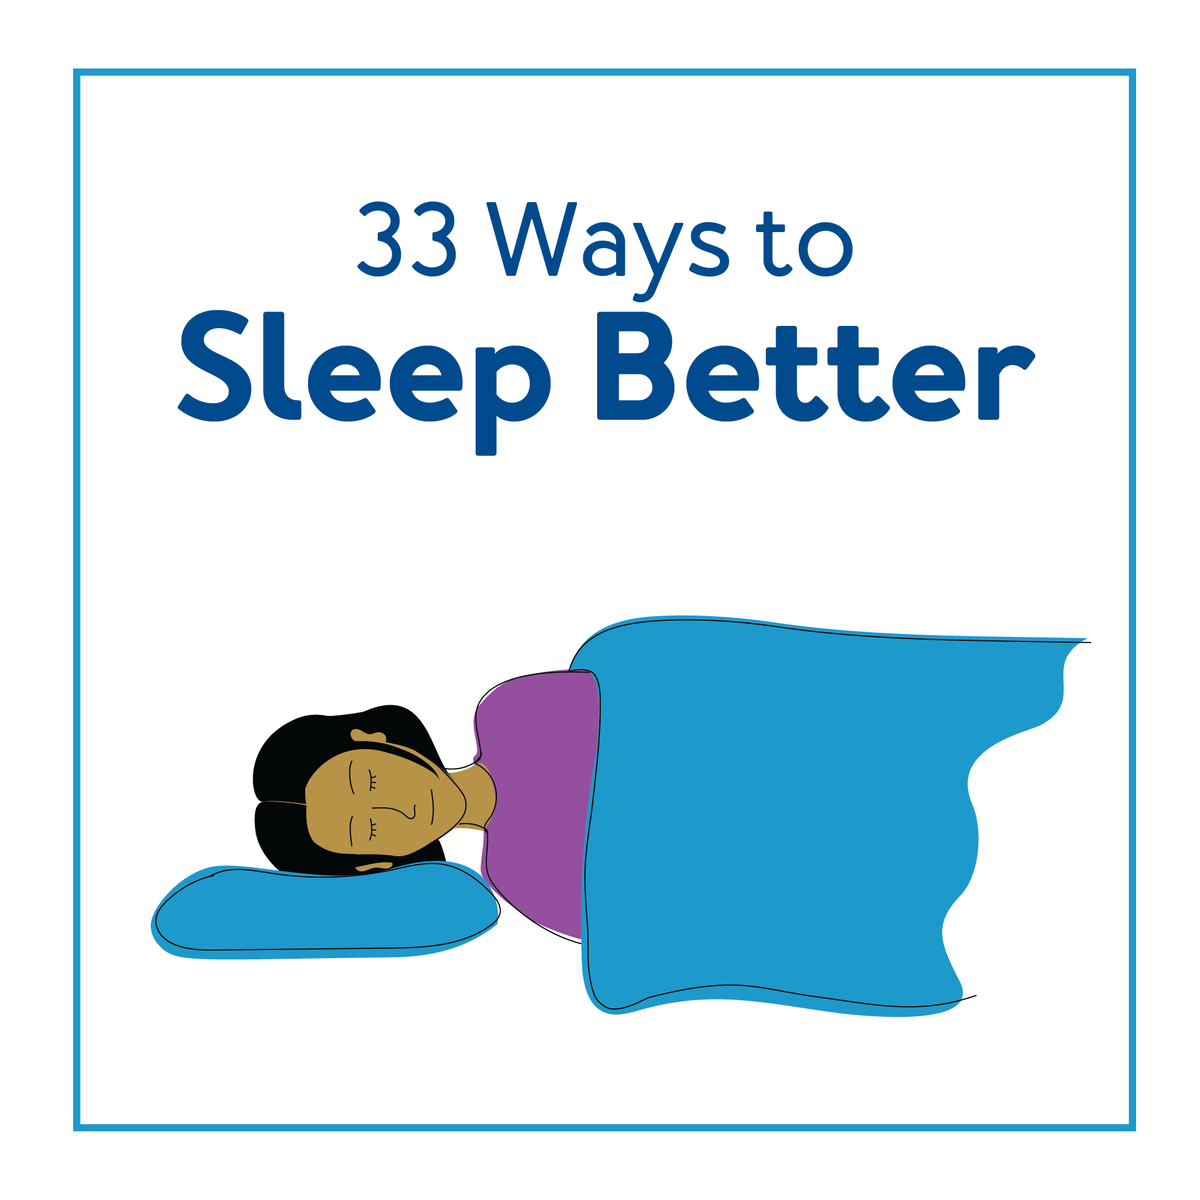 Cover image for 33 Ways to Sleep Better with a cartoon character sleeping